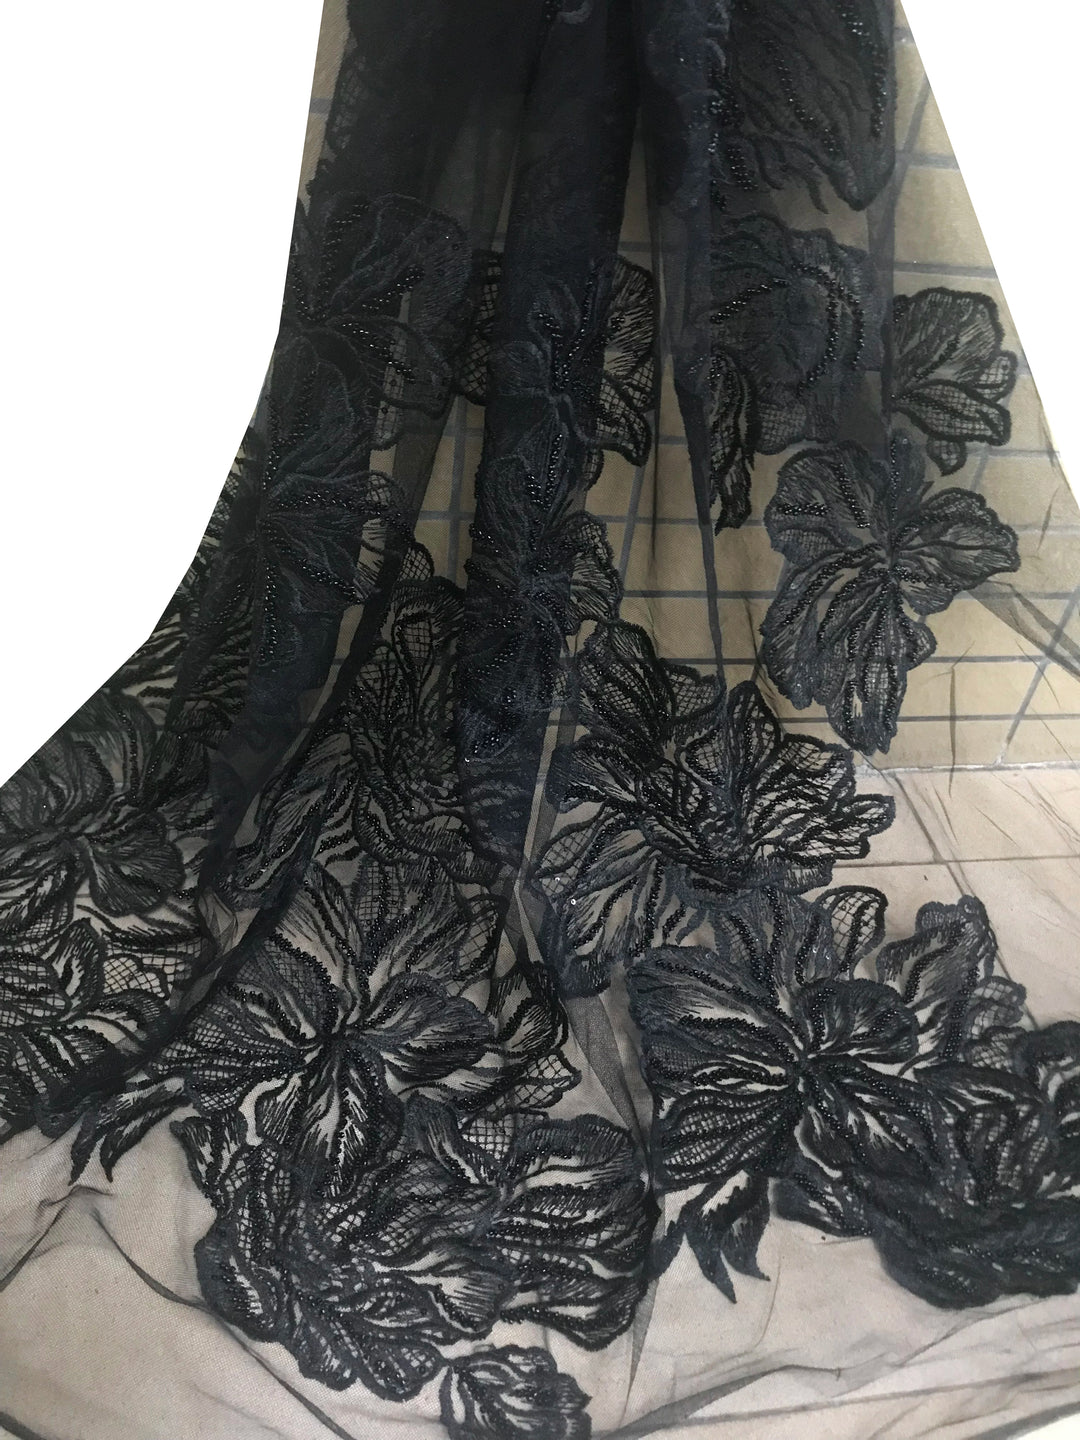 5 YARDS / Simone Black Rose Floral Glitter Sequin Beaded Embroidery Tulle Mesh Lace Party Prom Bridal Dress Fabric